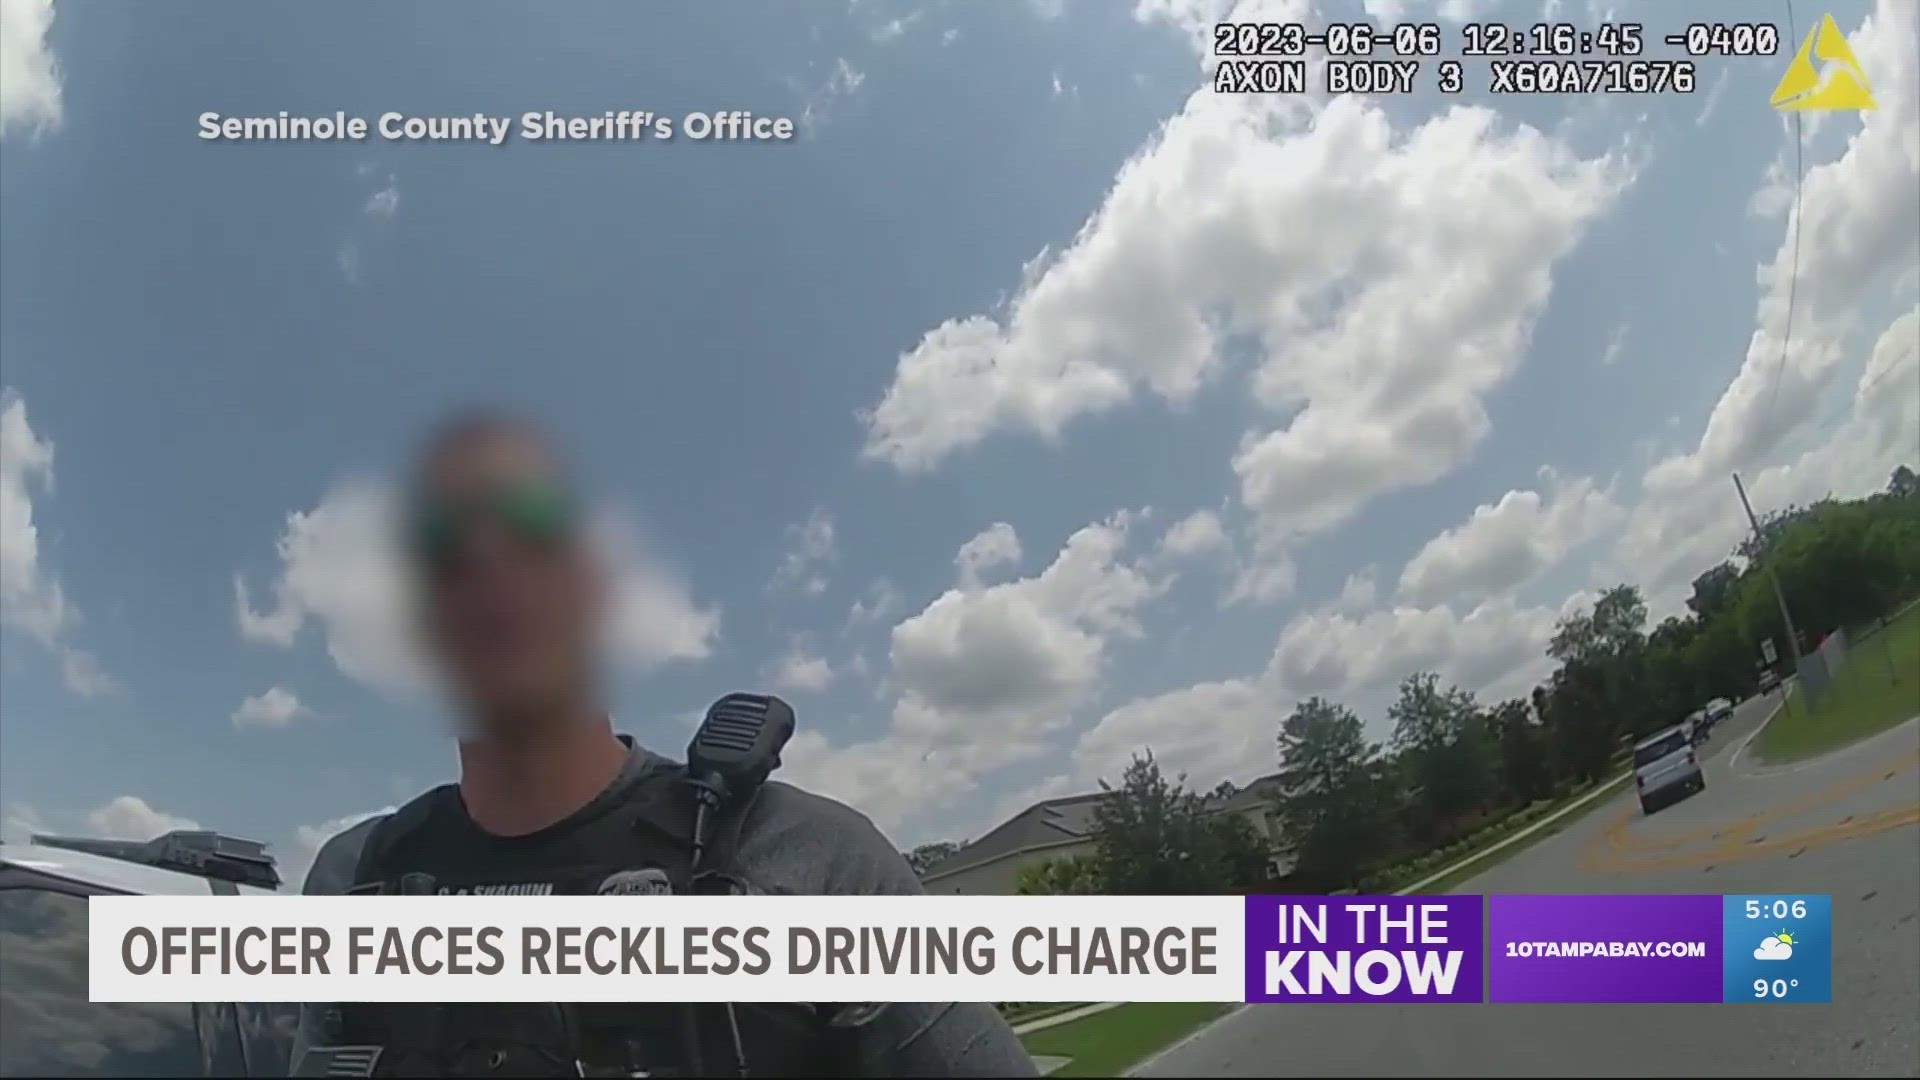 The officer was relieved of duty after a video showed him leaving a traffic stop after getting pulled over for speeding.